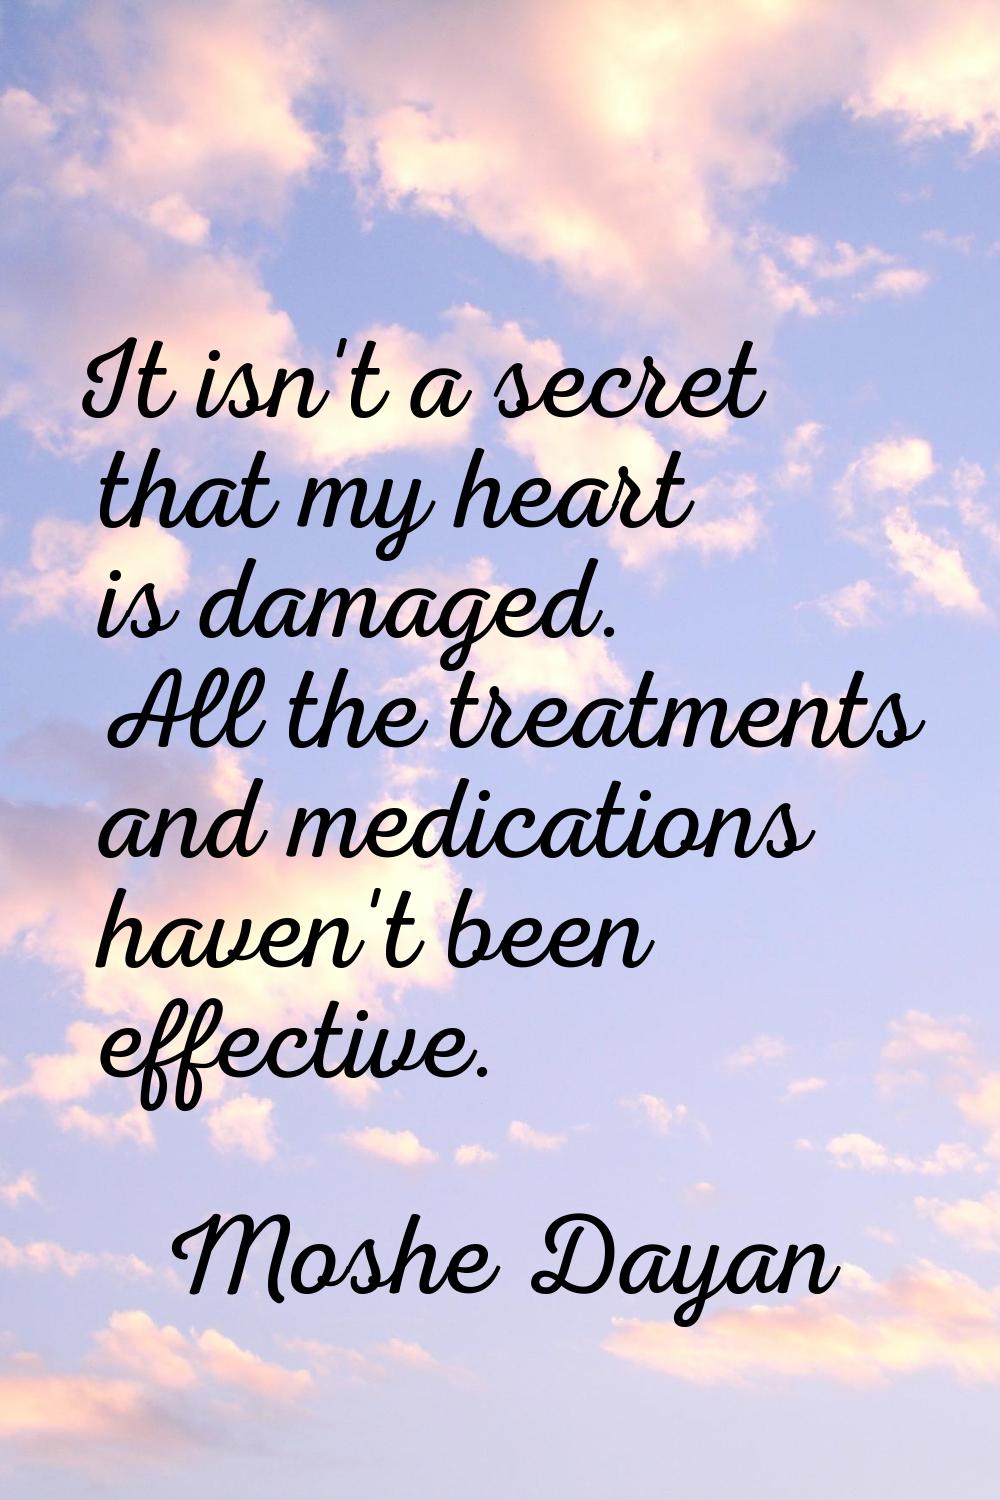 It isn't a secret that my heart is damaged. All the treatments and medications haven't been effecti